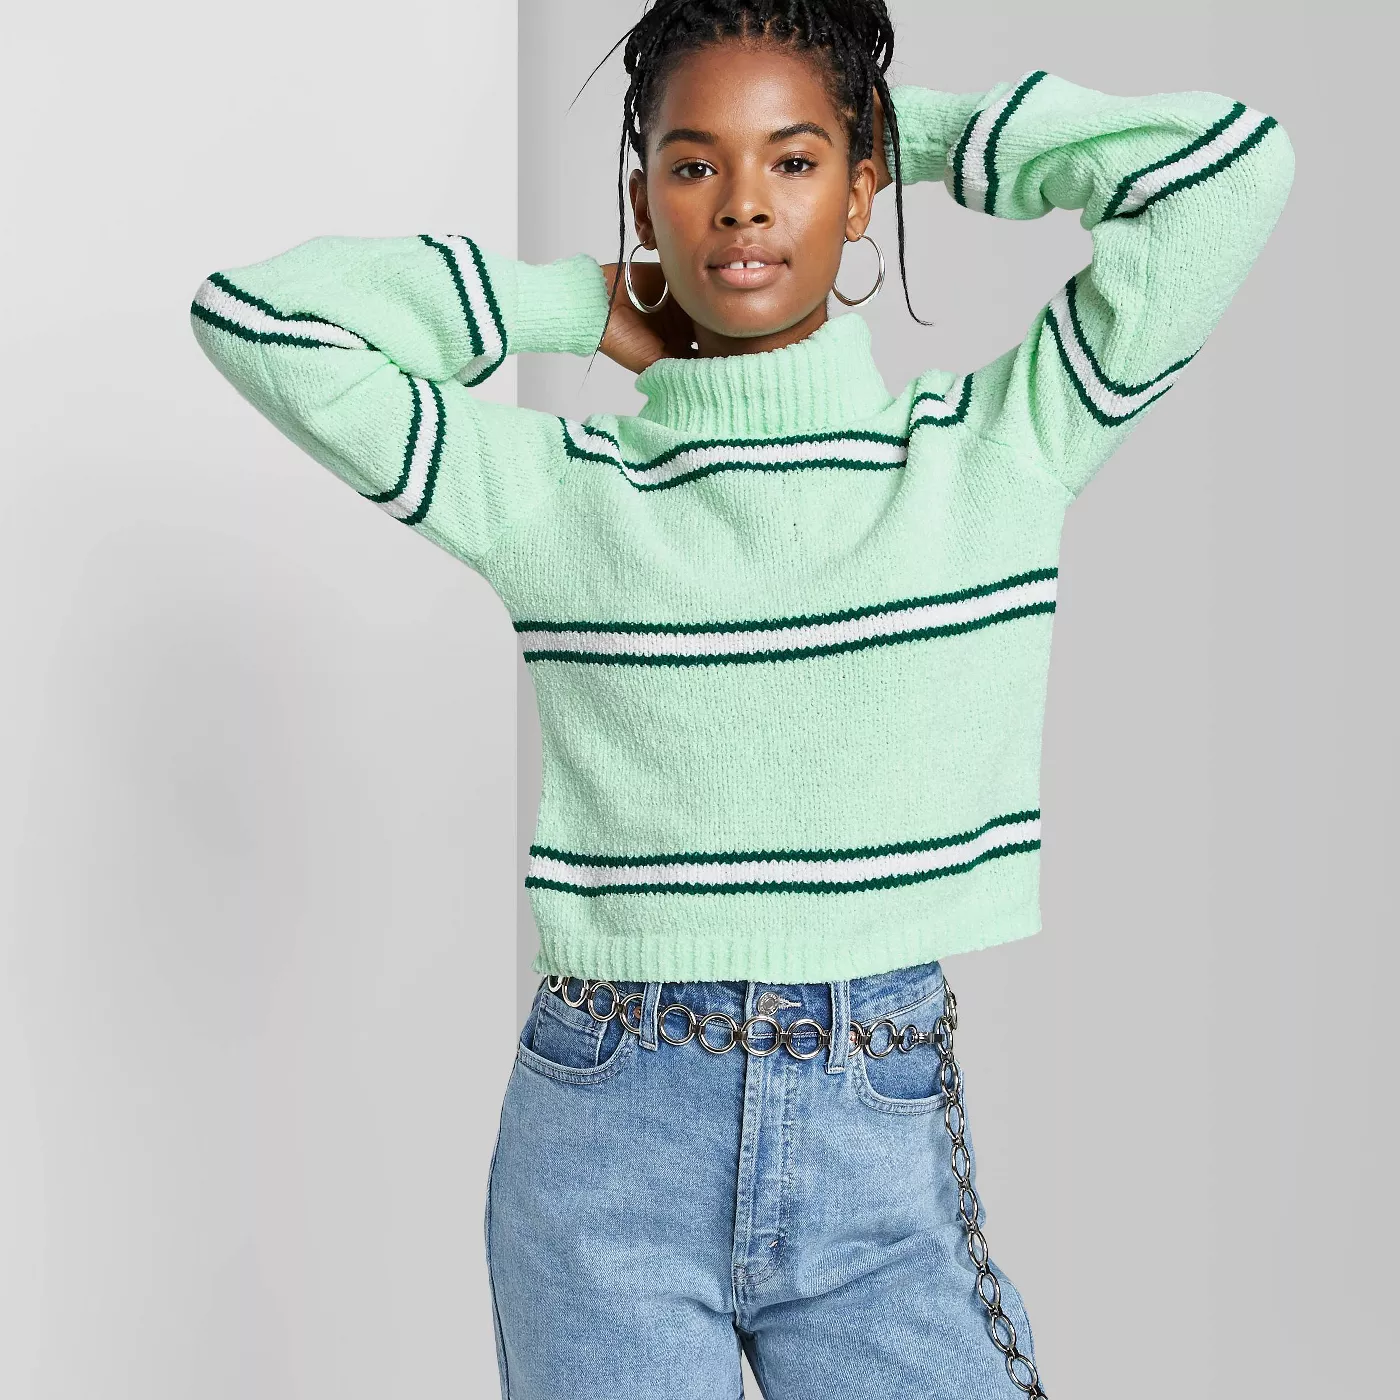 Women's Striped Turtleneck Pullover Sweater - Wild Fable™ - image 1 of 8